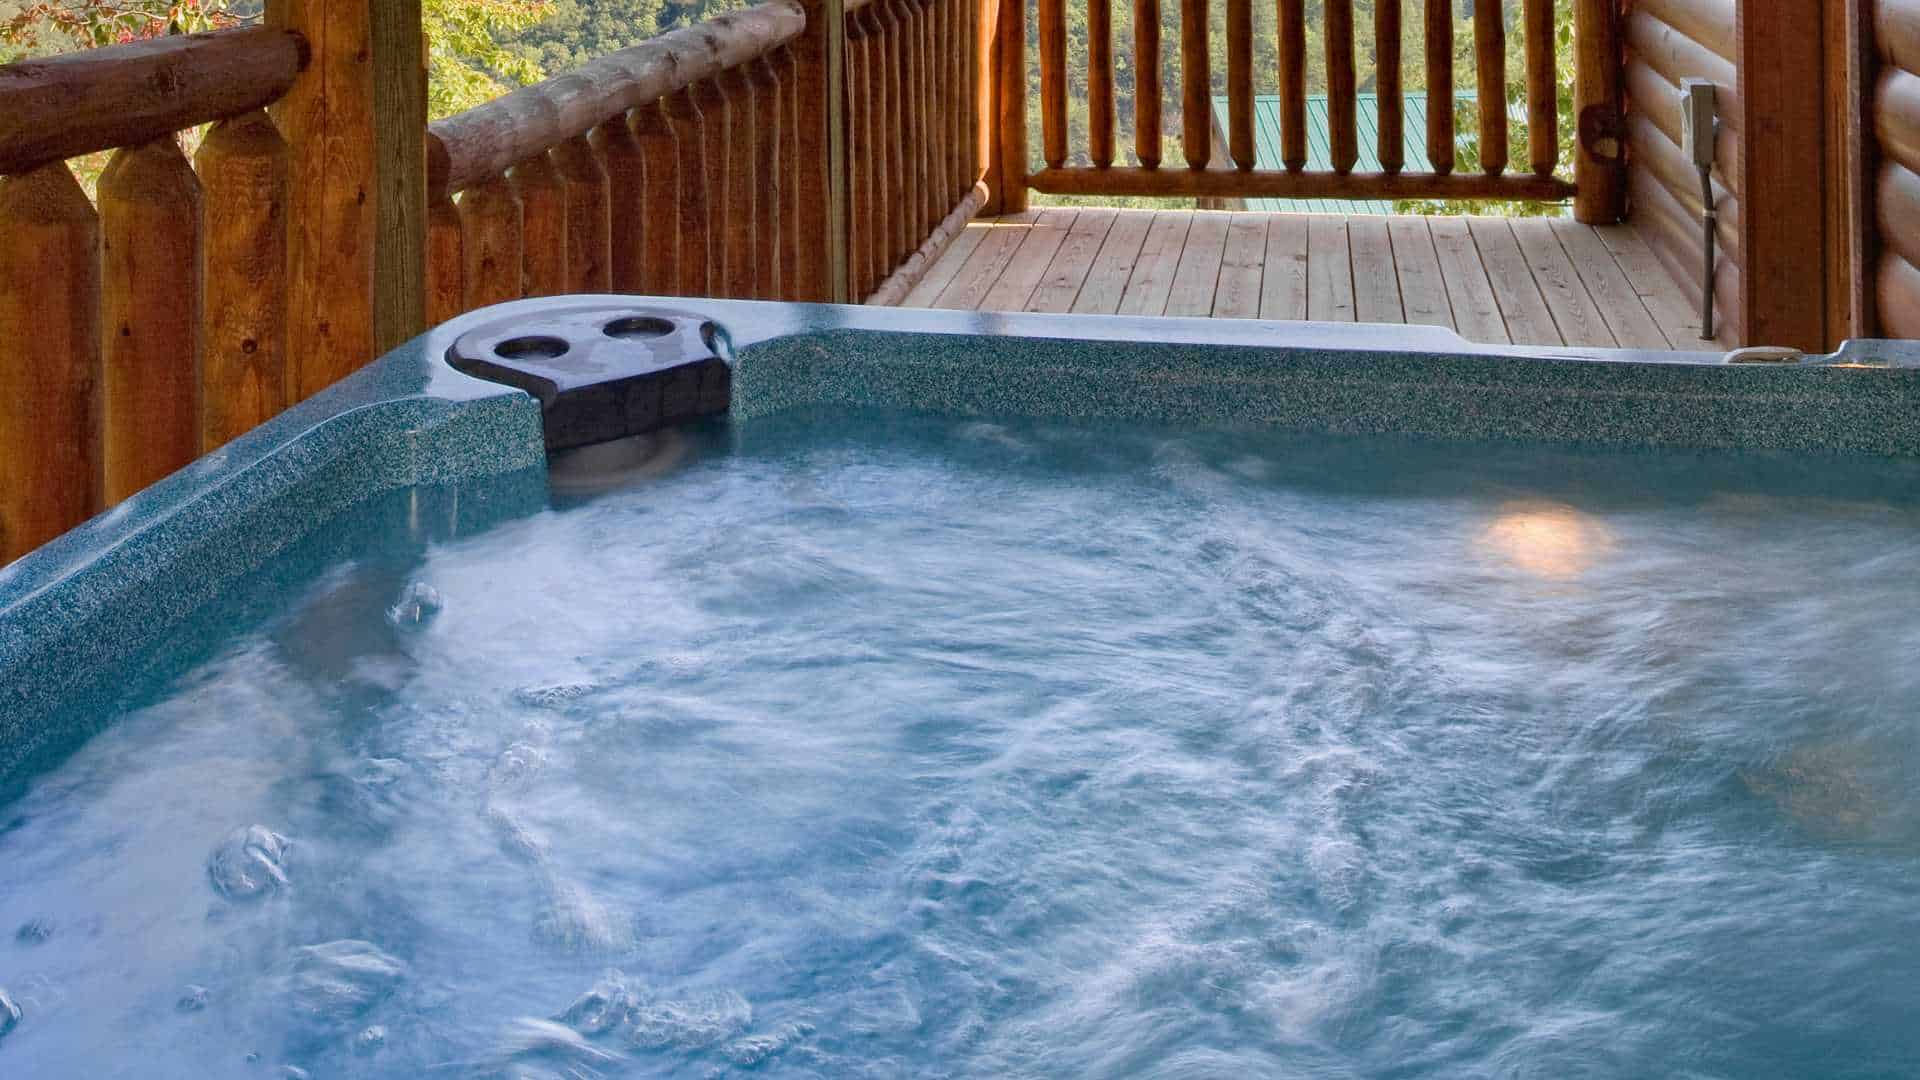 How High Should a Hot Tub Be Filled?